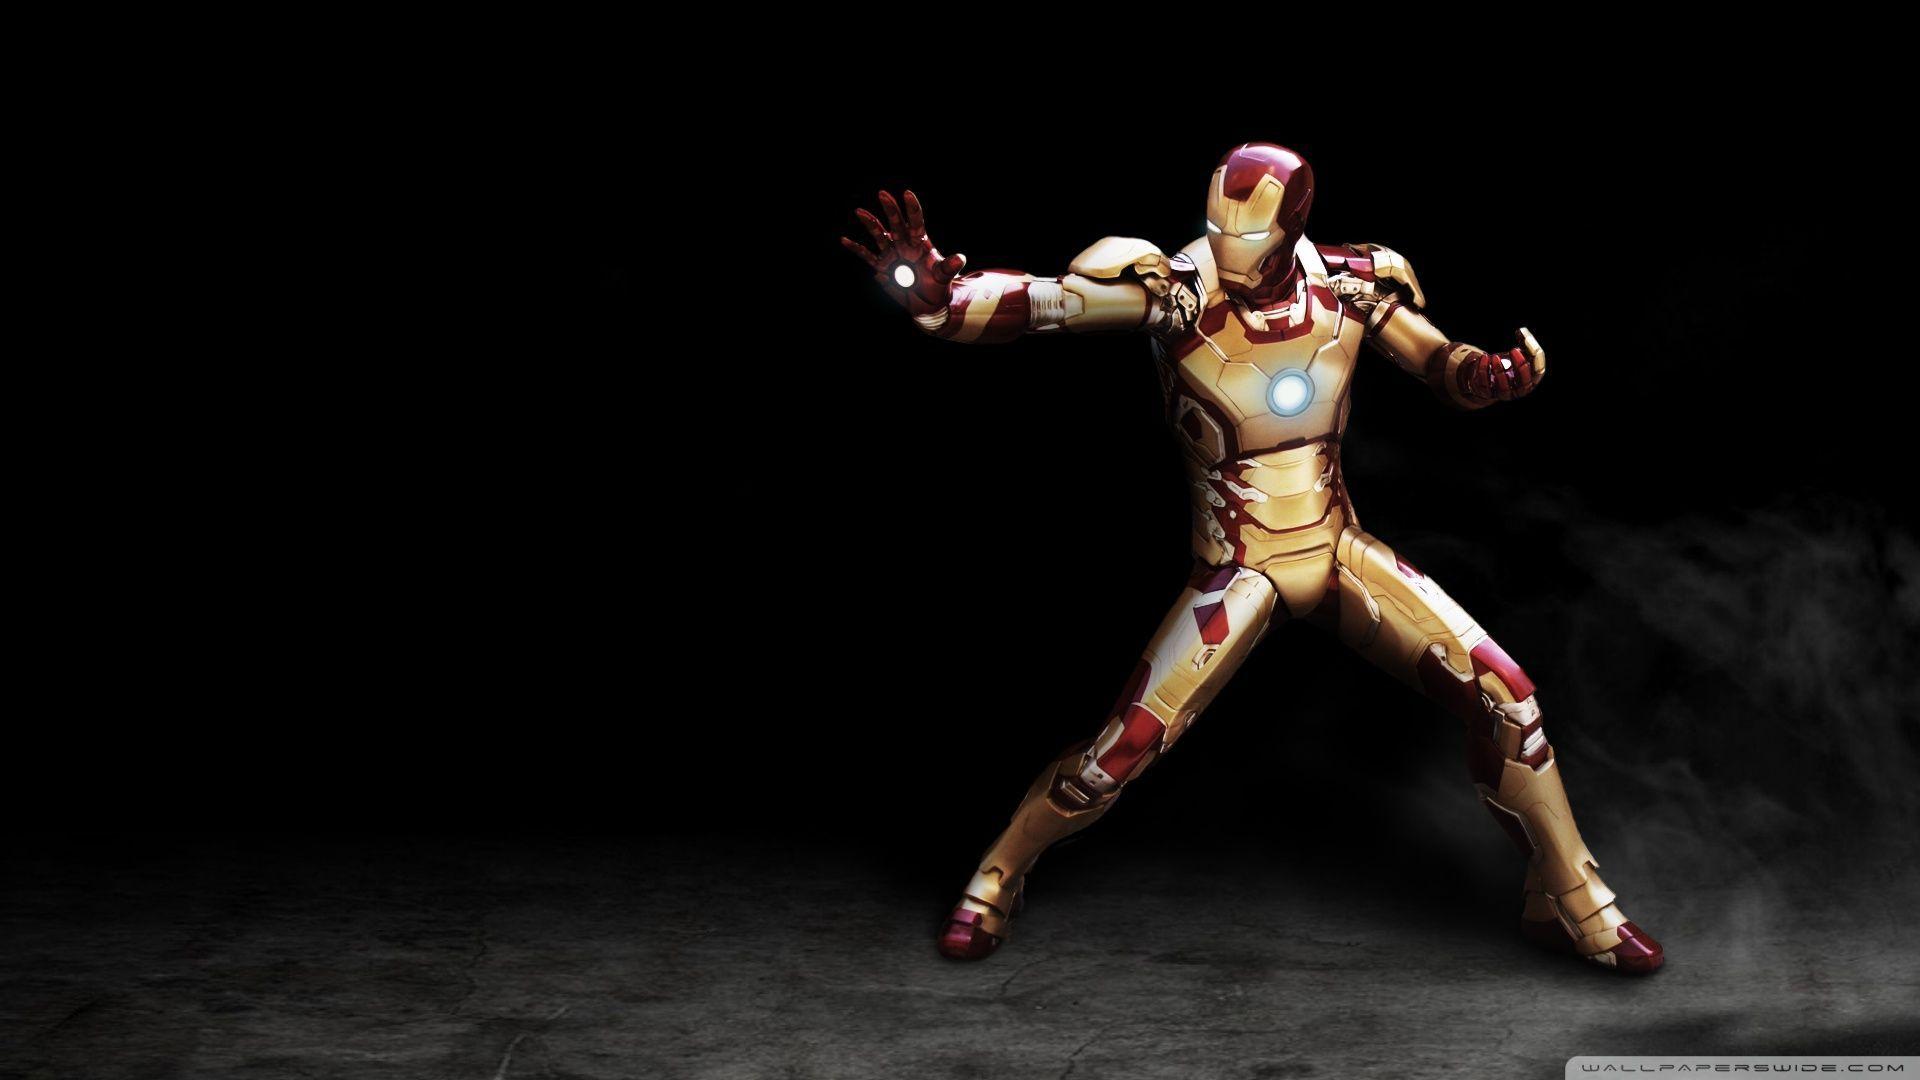 All Iron Man Suits Wallpapers - Wallpaper Cave